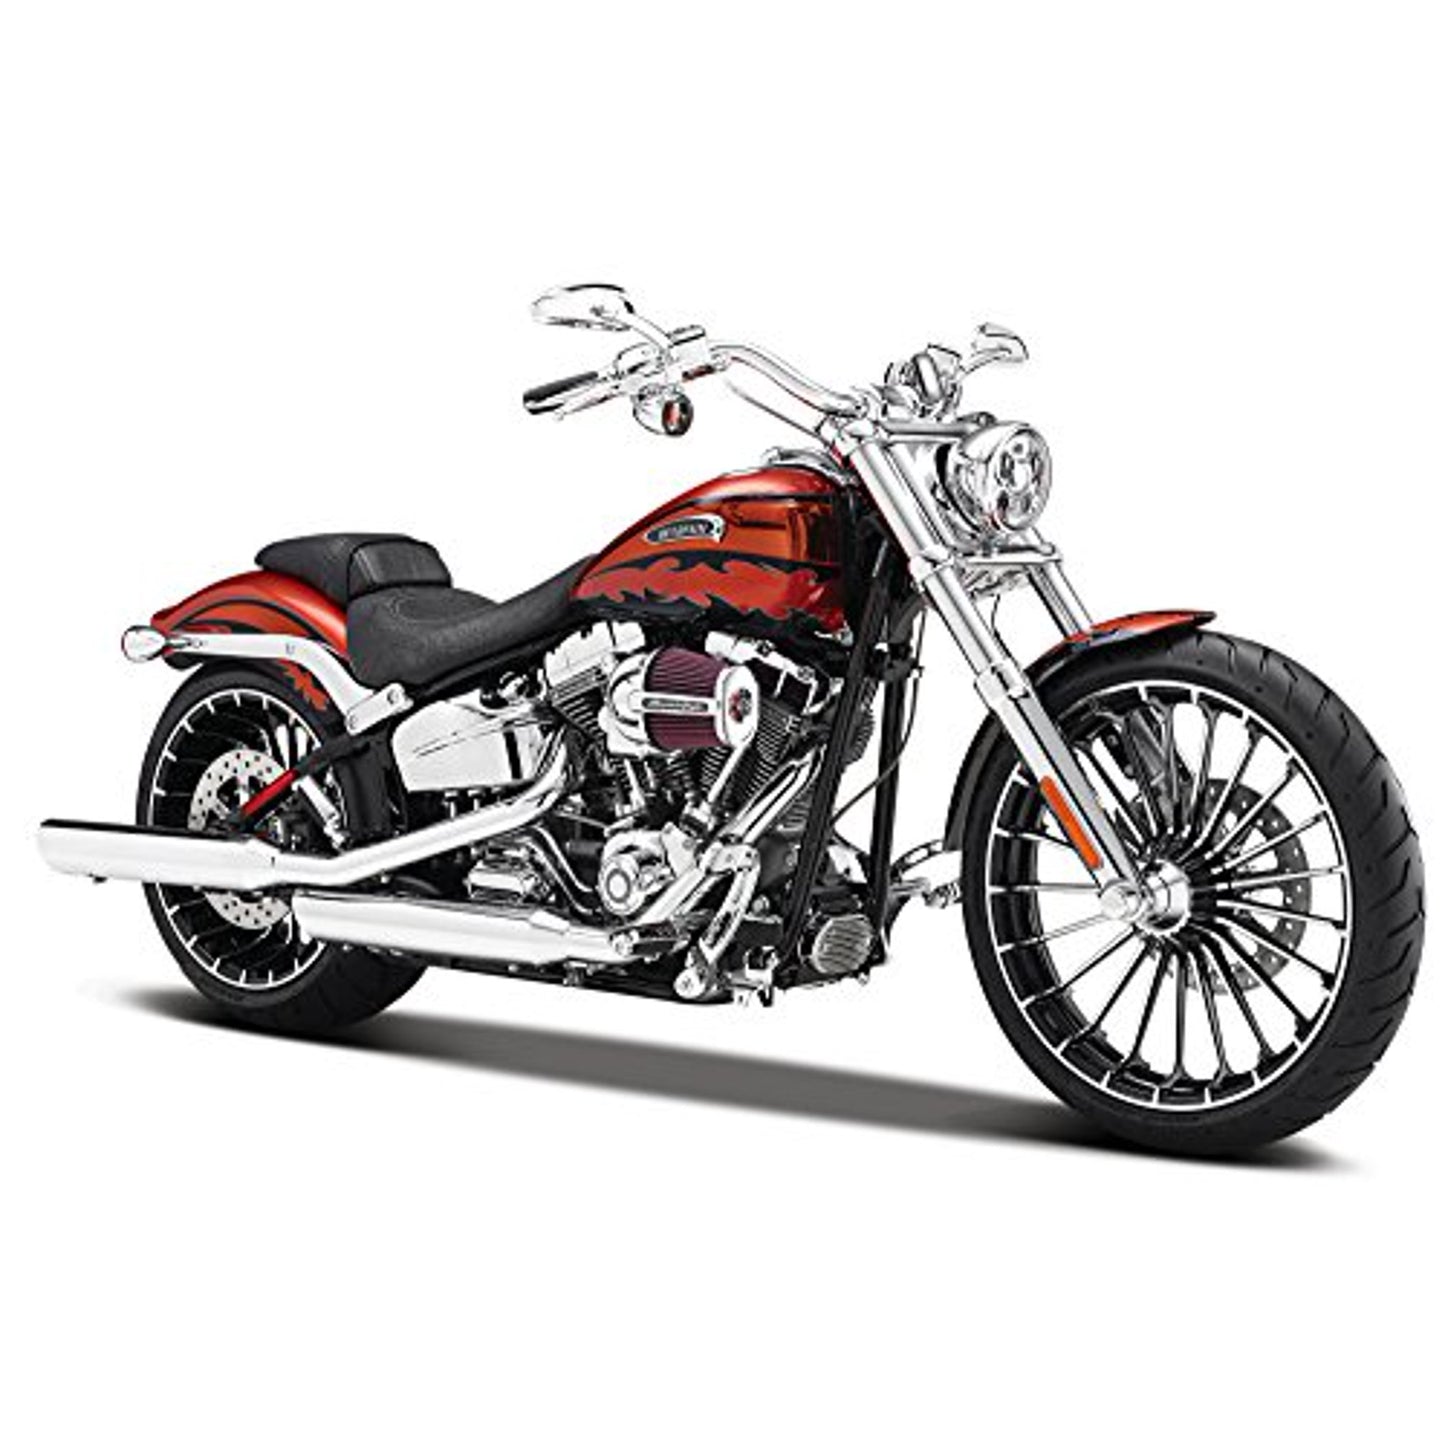 Harley-Davidson® 1:12 Scale Die-Cast Motorcycles by Maisto